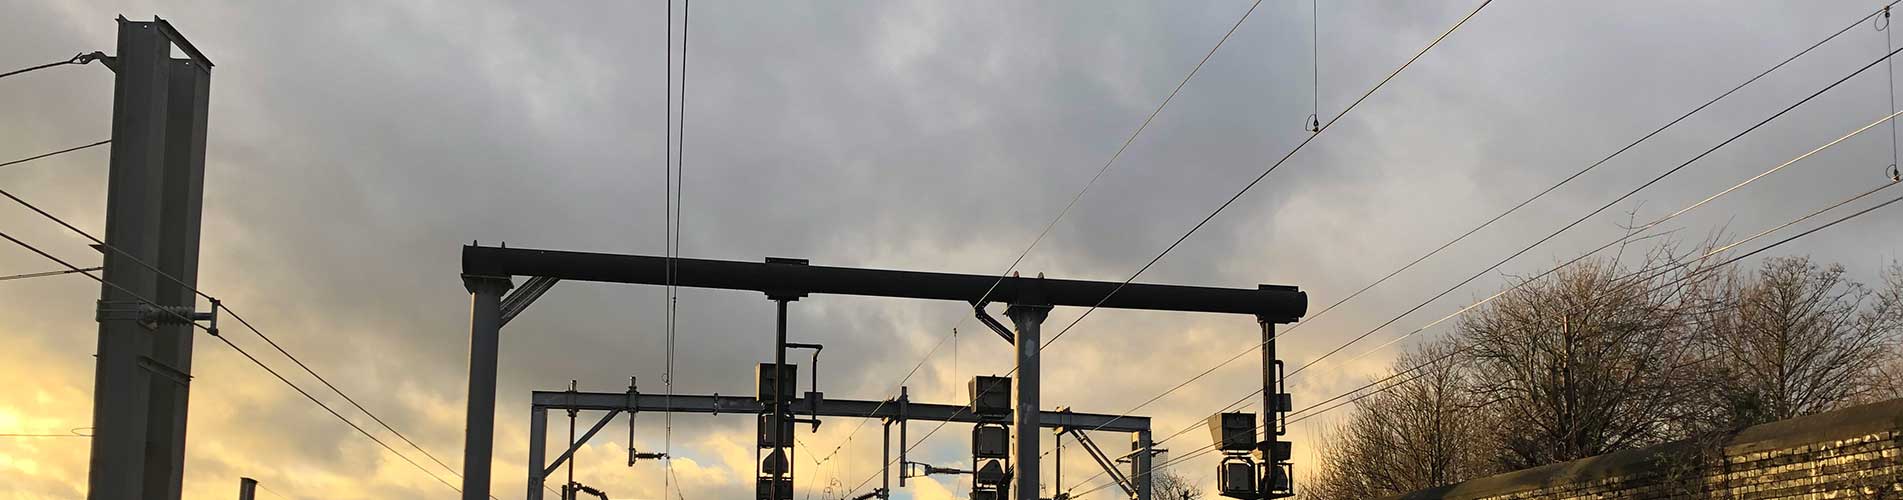 Photograph of the location of an incident involving overhead wires overhead lines 2.5 miles outside Paddington Station, near Kensal Green, London